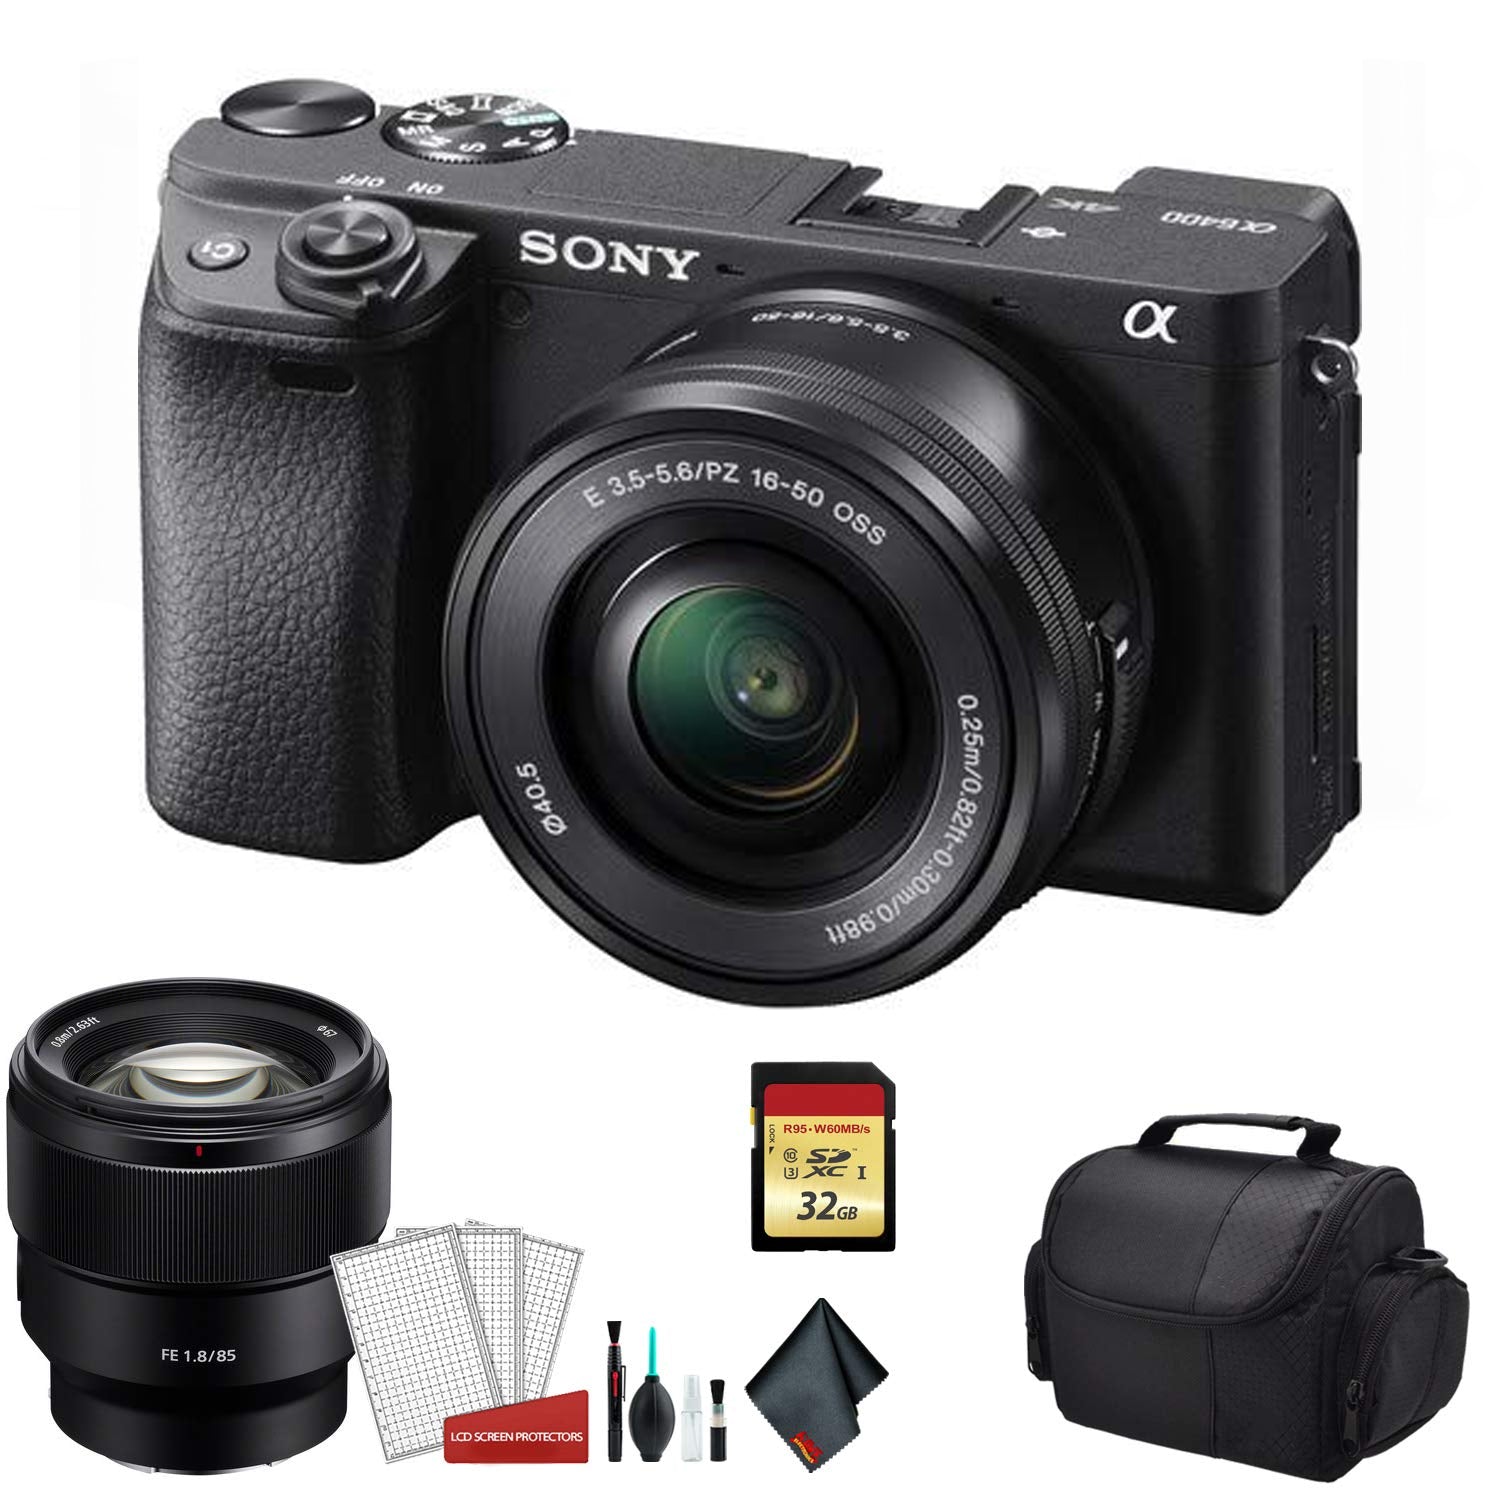 Sony Alpha a6400 Mirrorless Digital Camera with 16-50mm Lens Kit with Sony FE 85mm f/1.8 Lens and More - International M